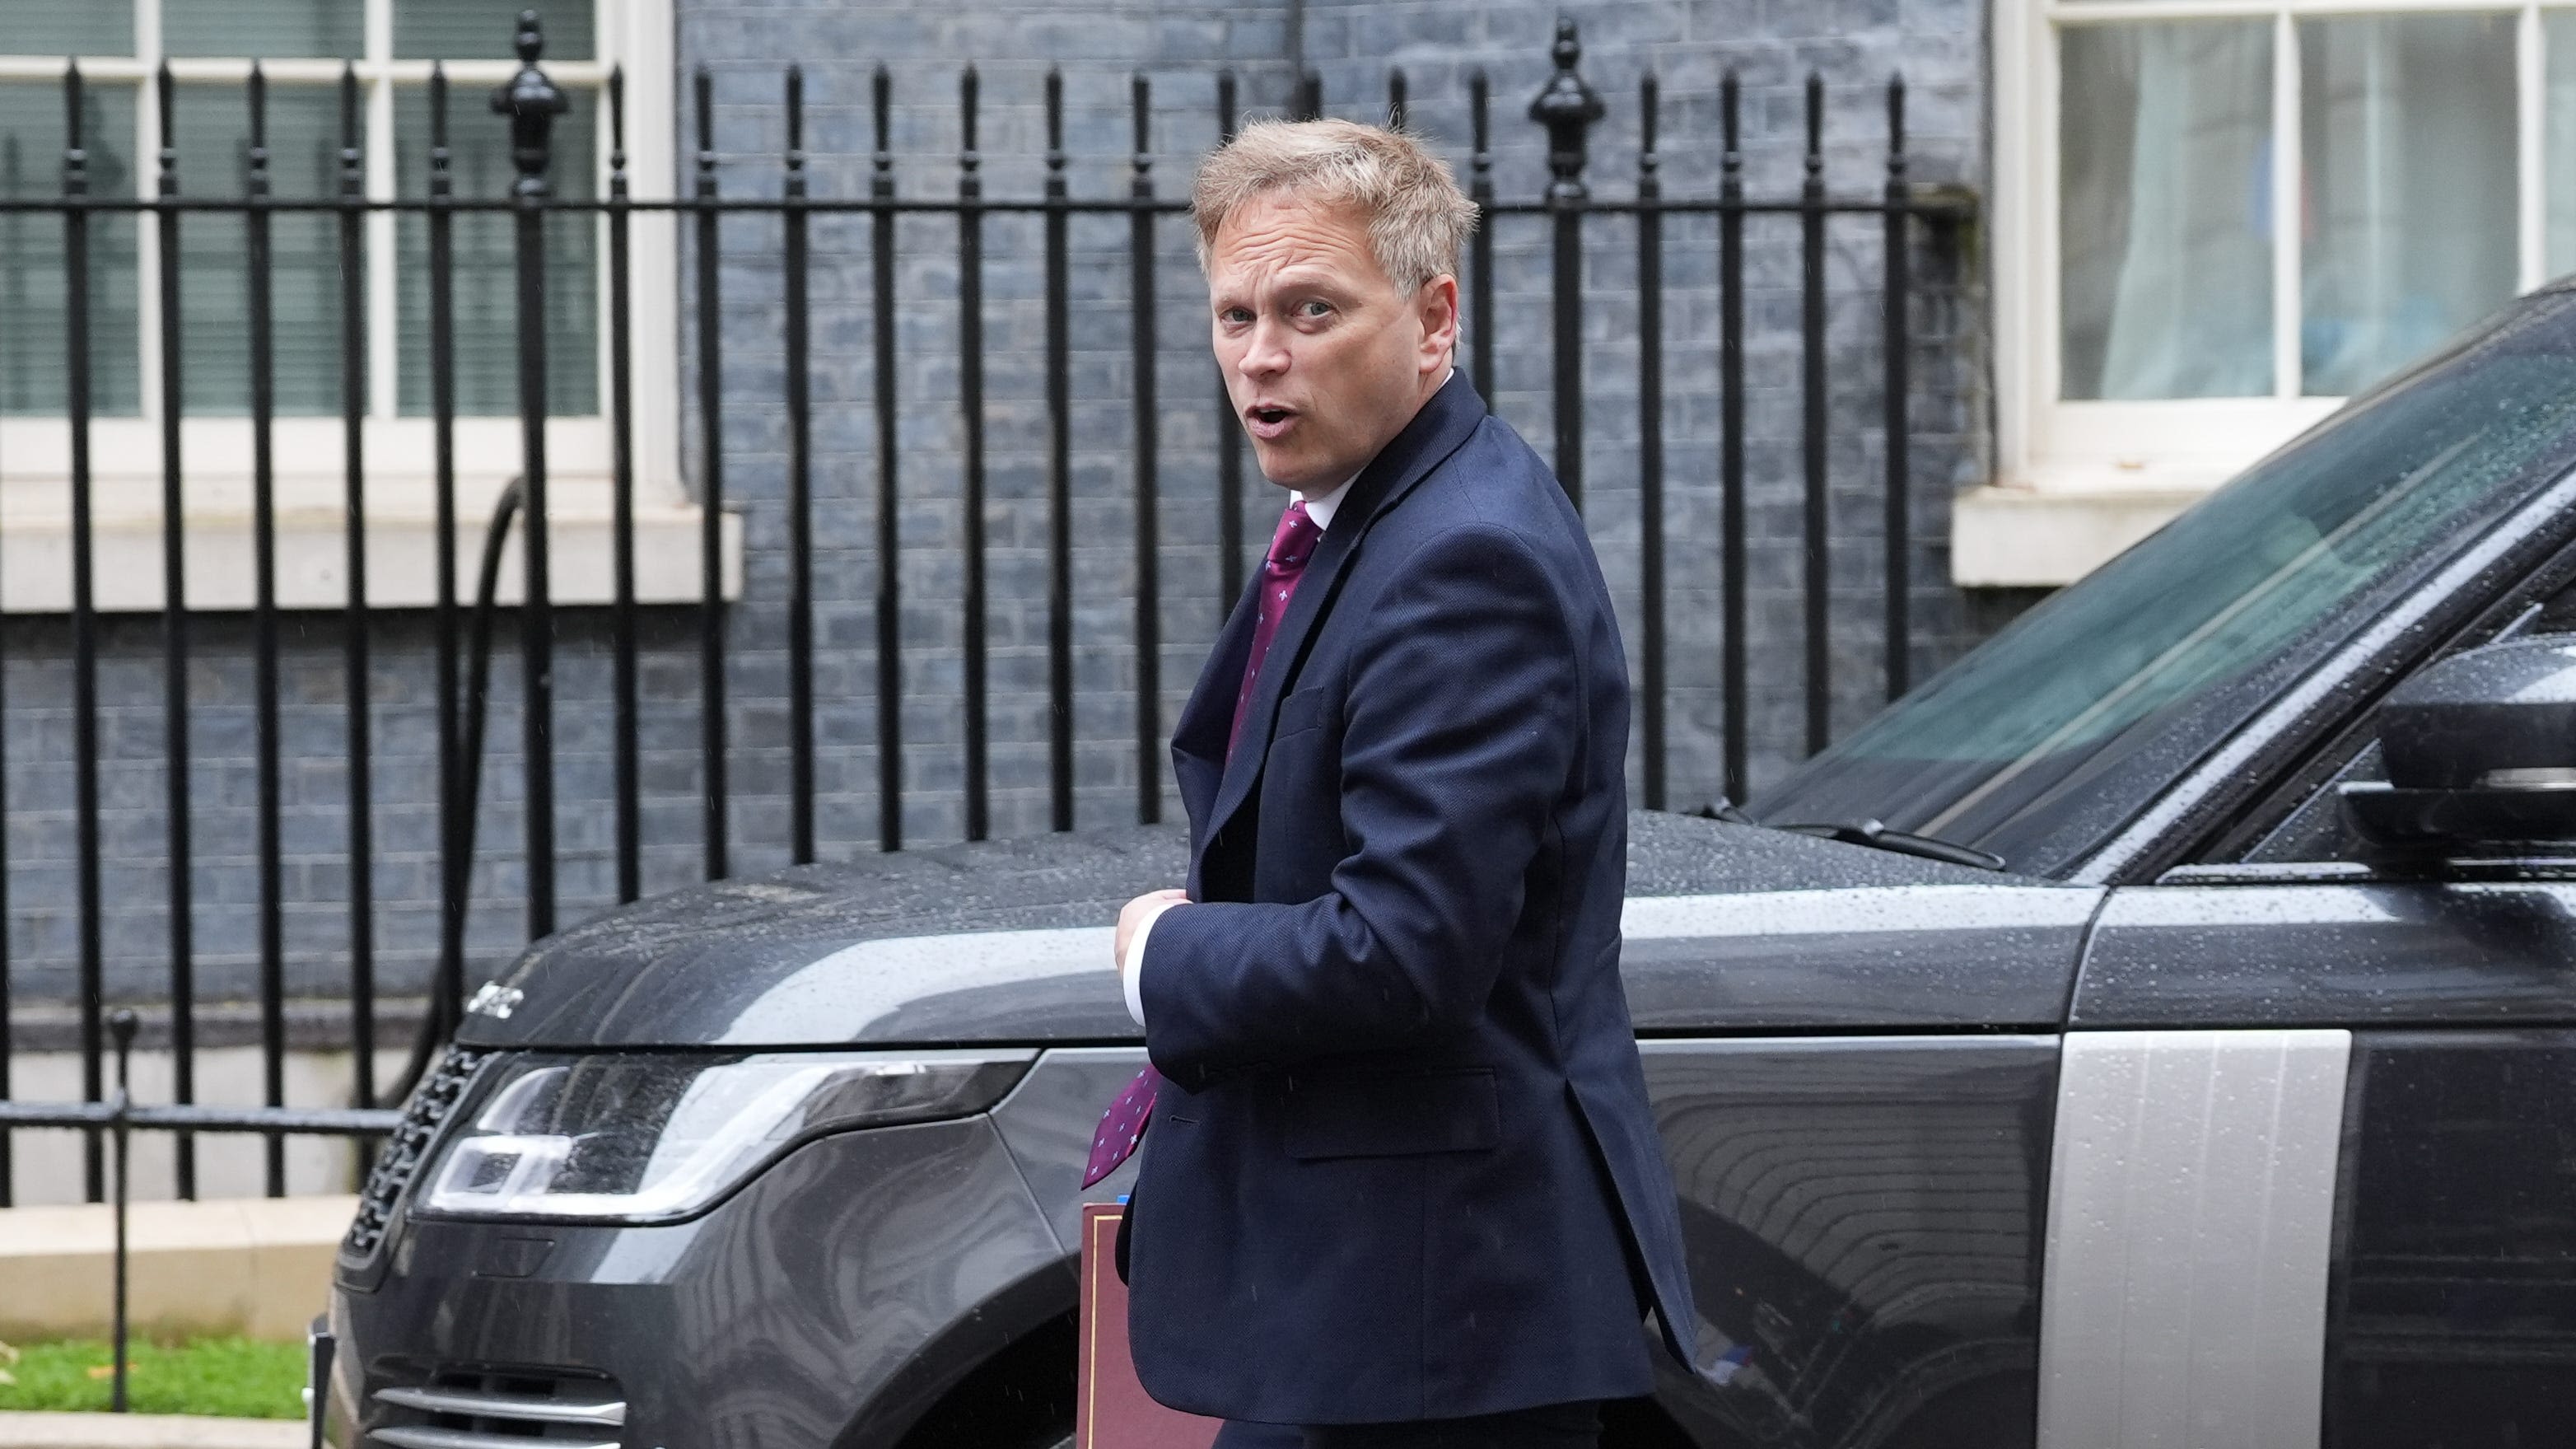 Lethal equipment flown from China to Russia for use in Ukraine, says Shapps